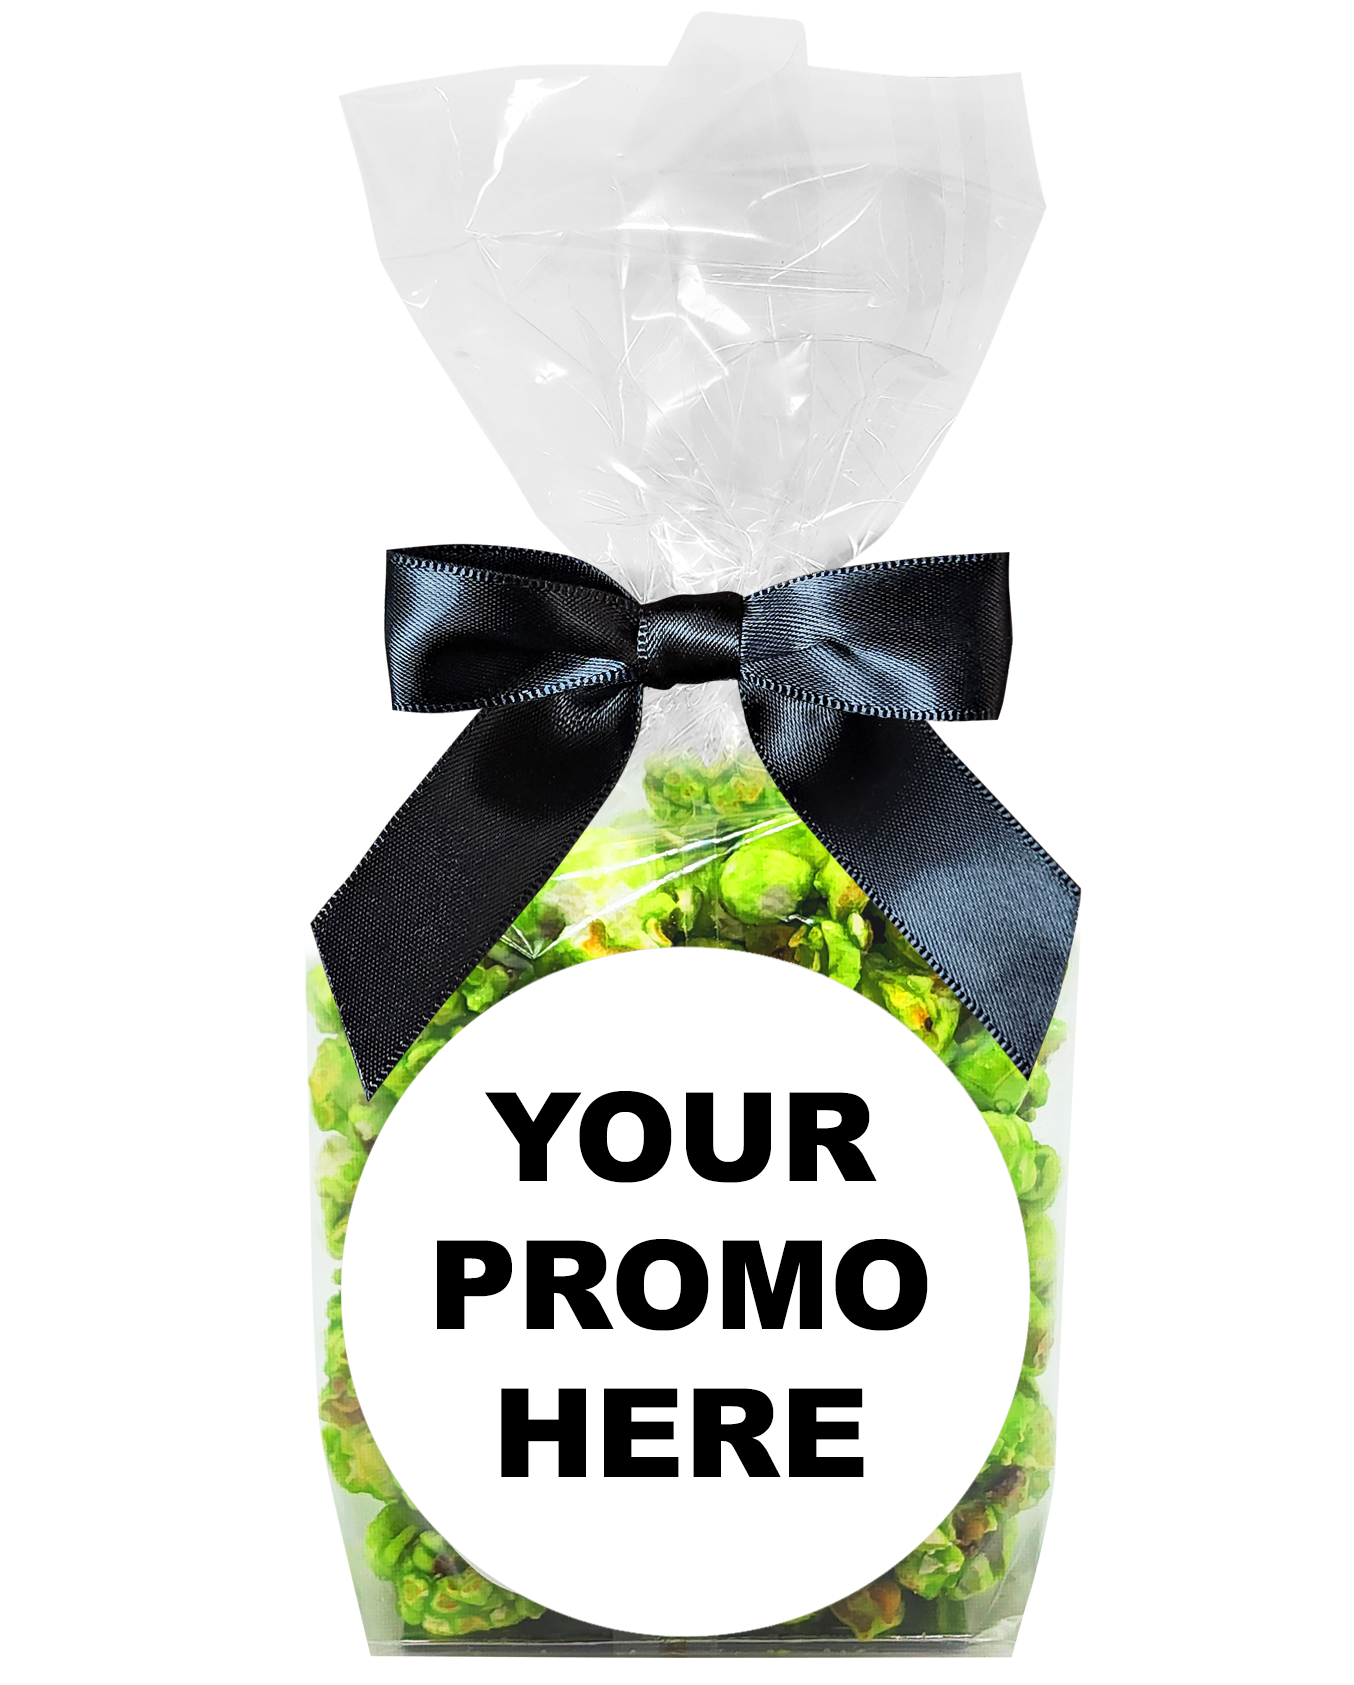 Pucker Pop!™ - Green Apple Bags & Bows (as low as $4.99 per bag) Case of 12 Price